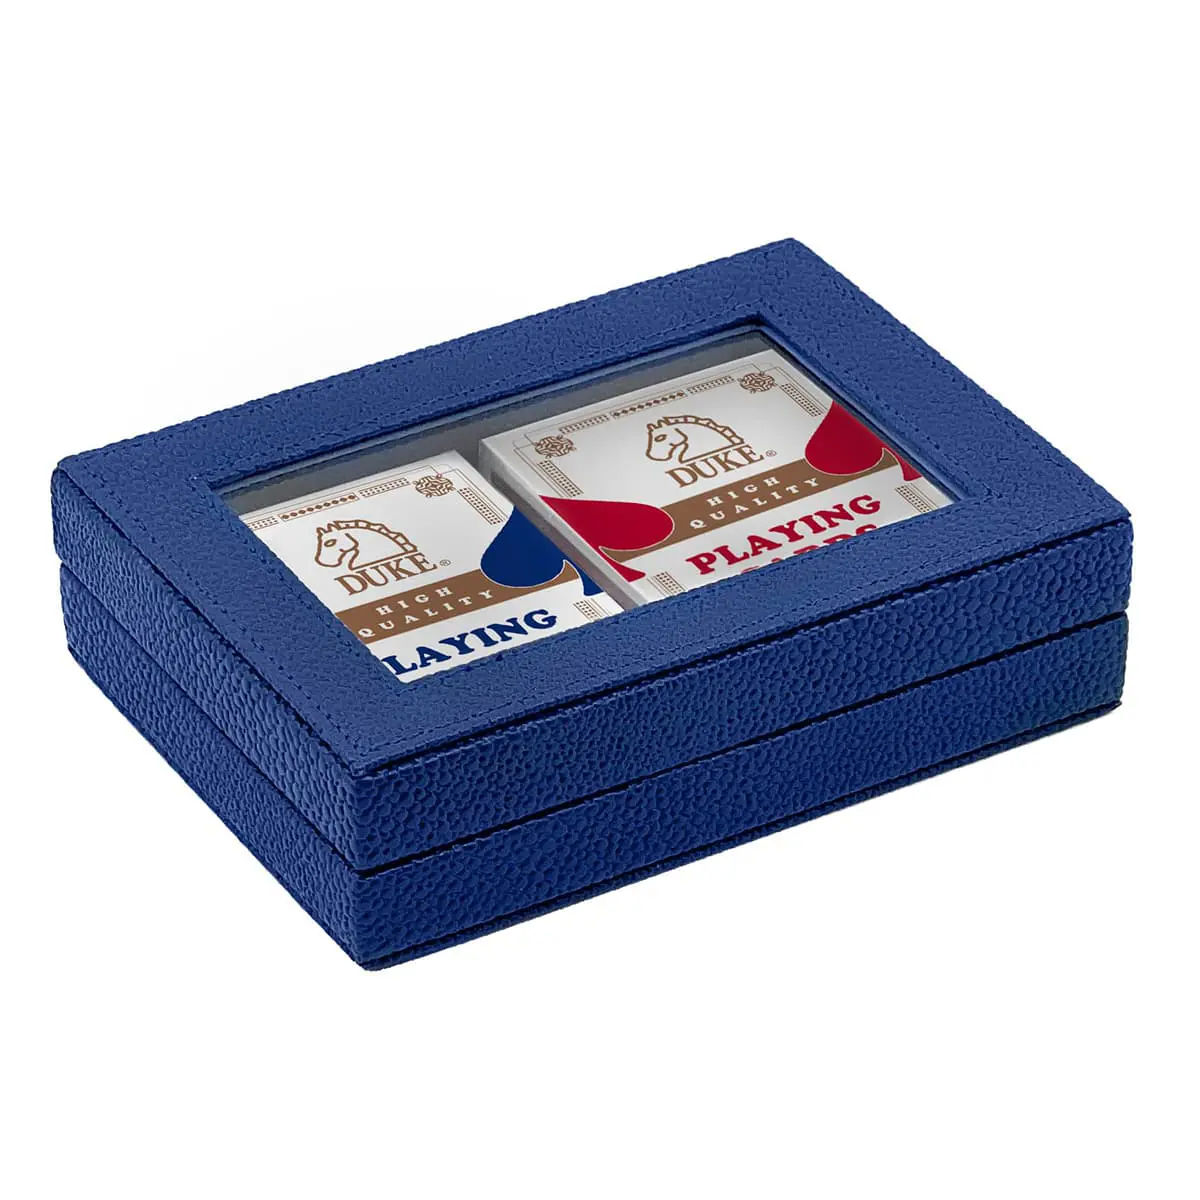 Double Deck Playing Card Game Set with Glass Window Case